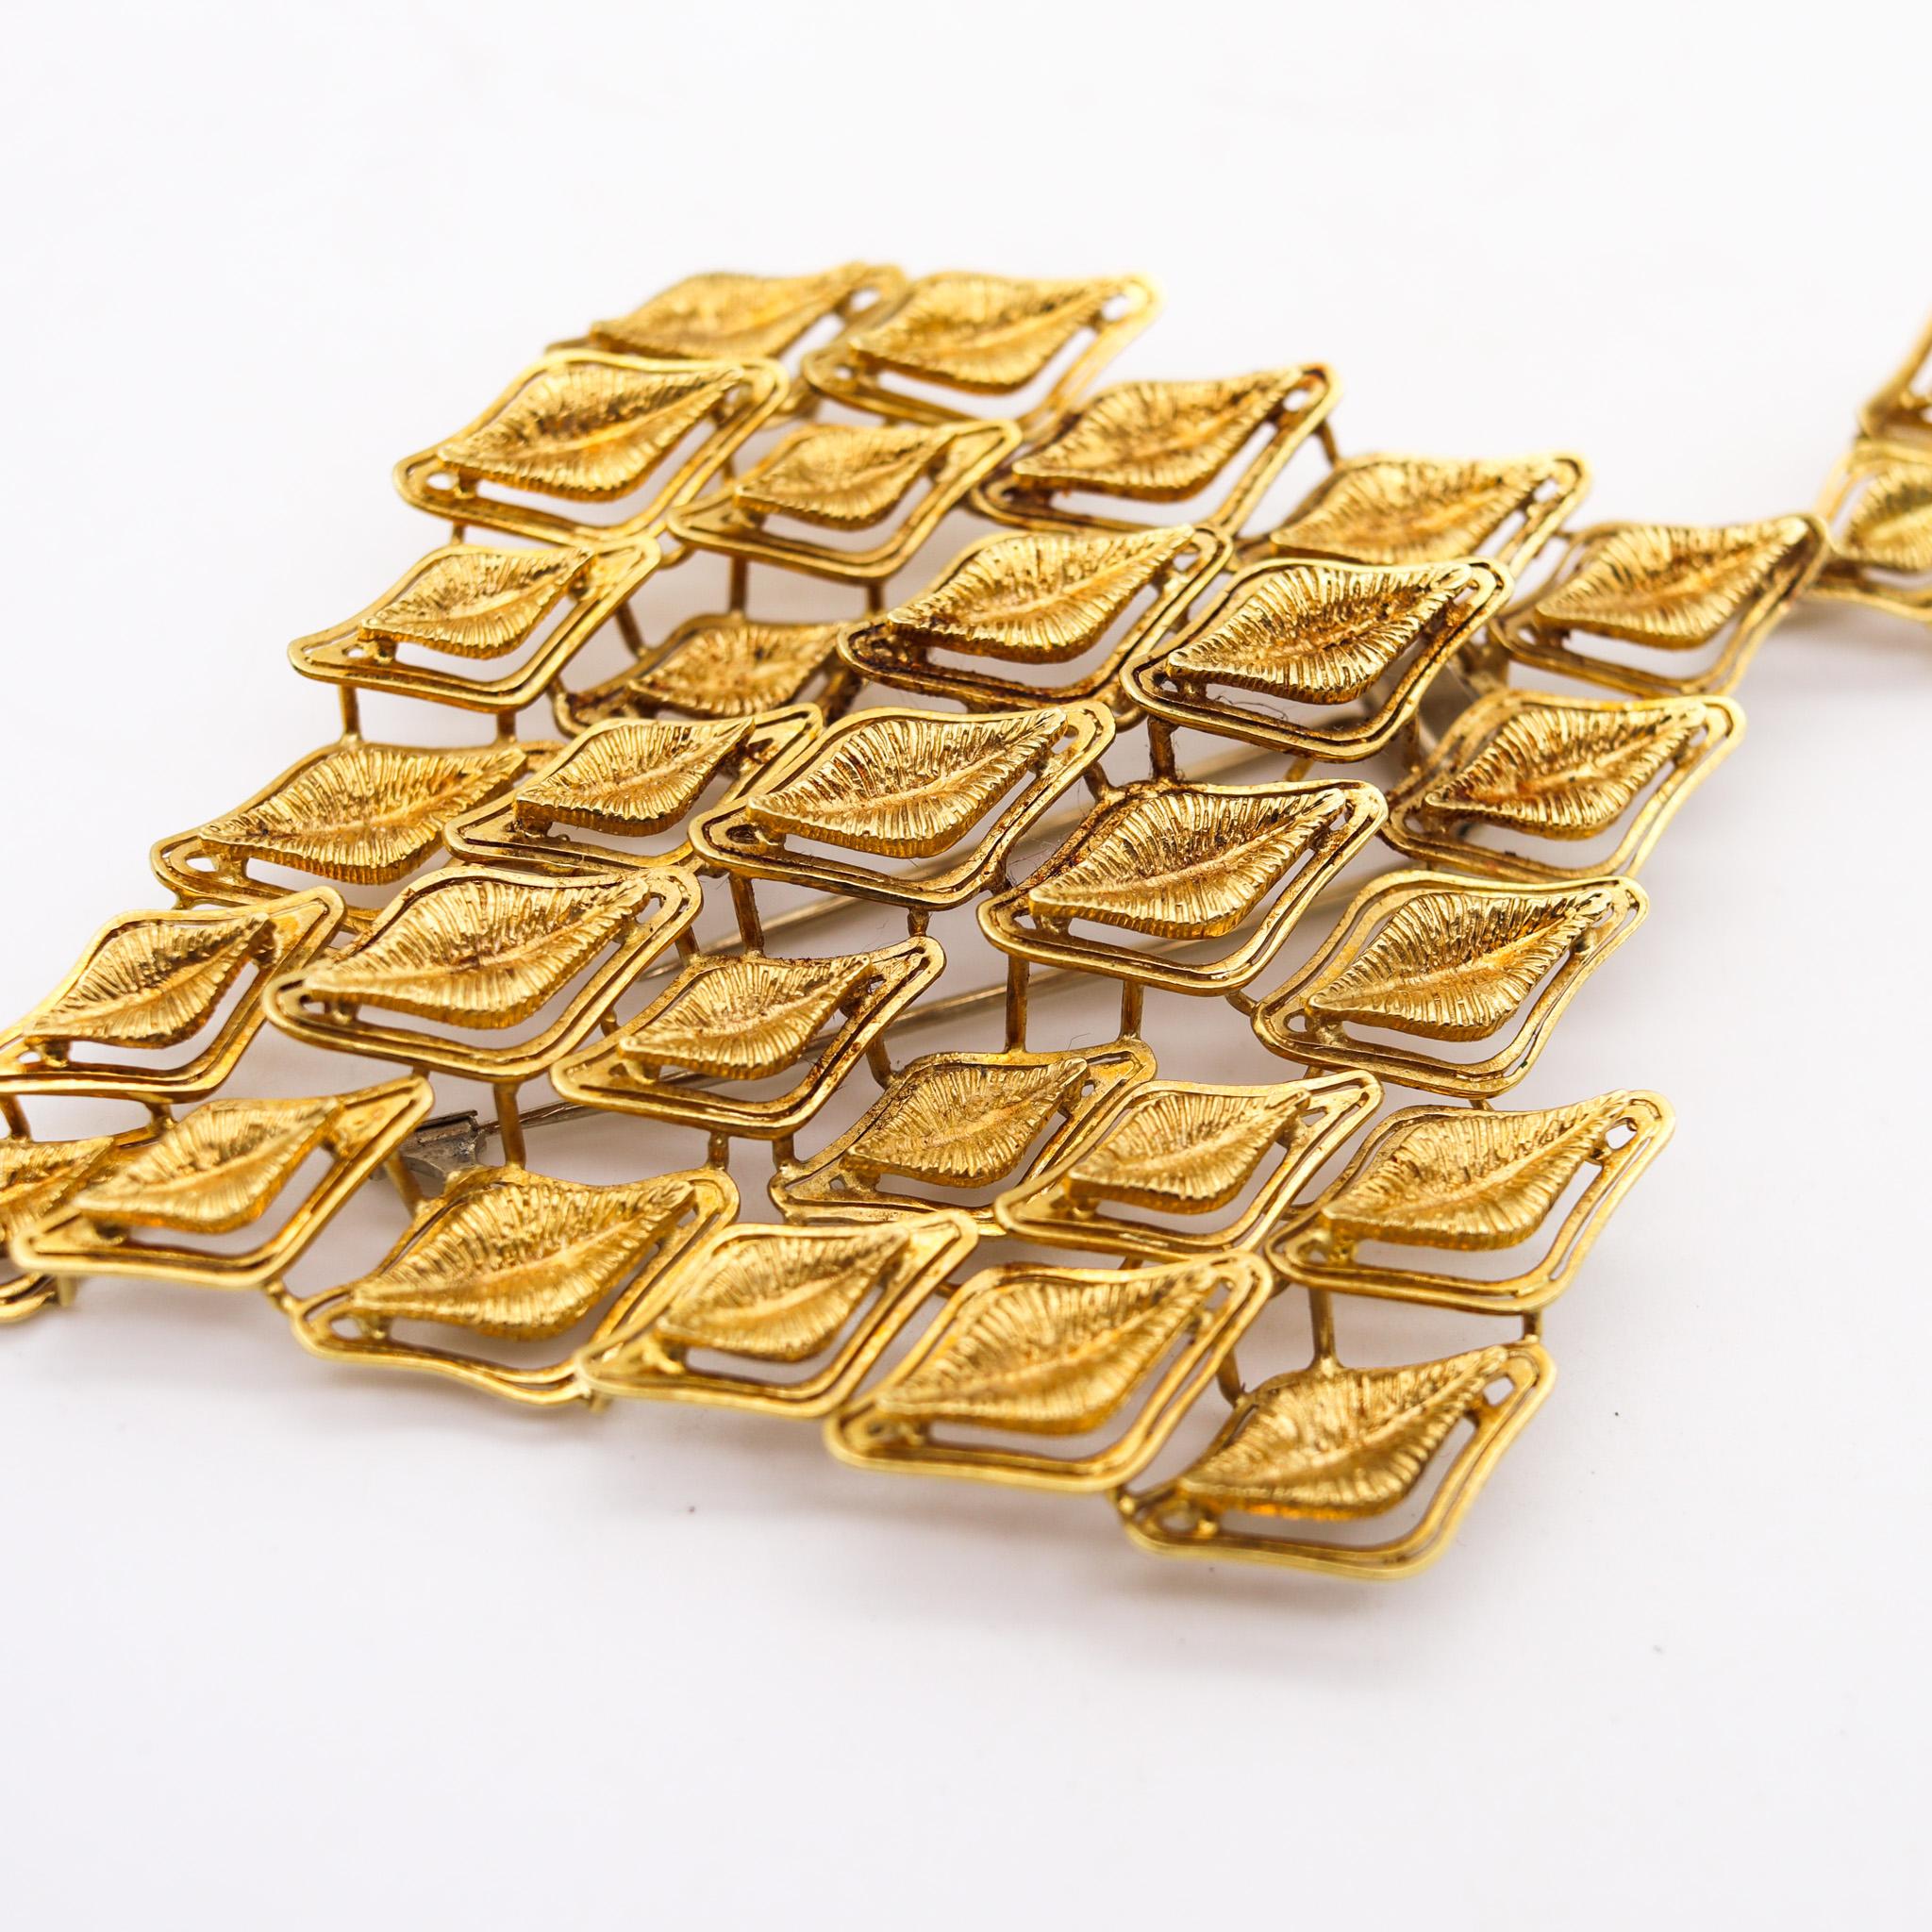 Spritzer & Furhmann 1960 Retro Modernist Large Pendant In Solid 18Kt Yellow Gold In Excellent Condition For Sale In Miami, FL